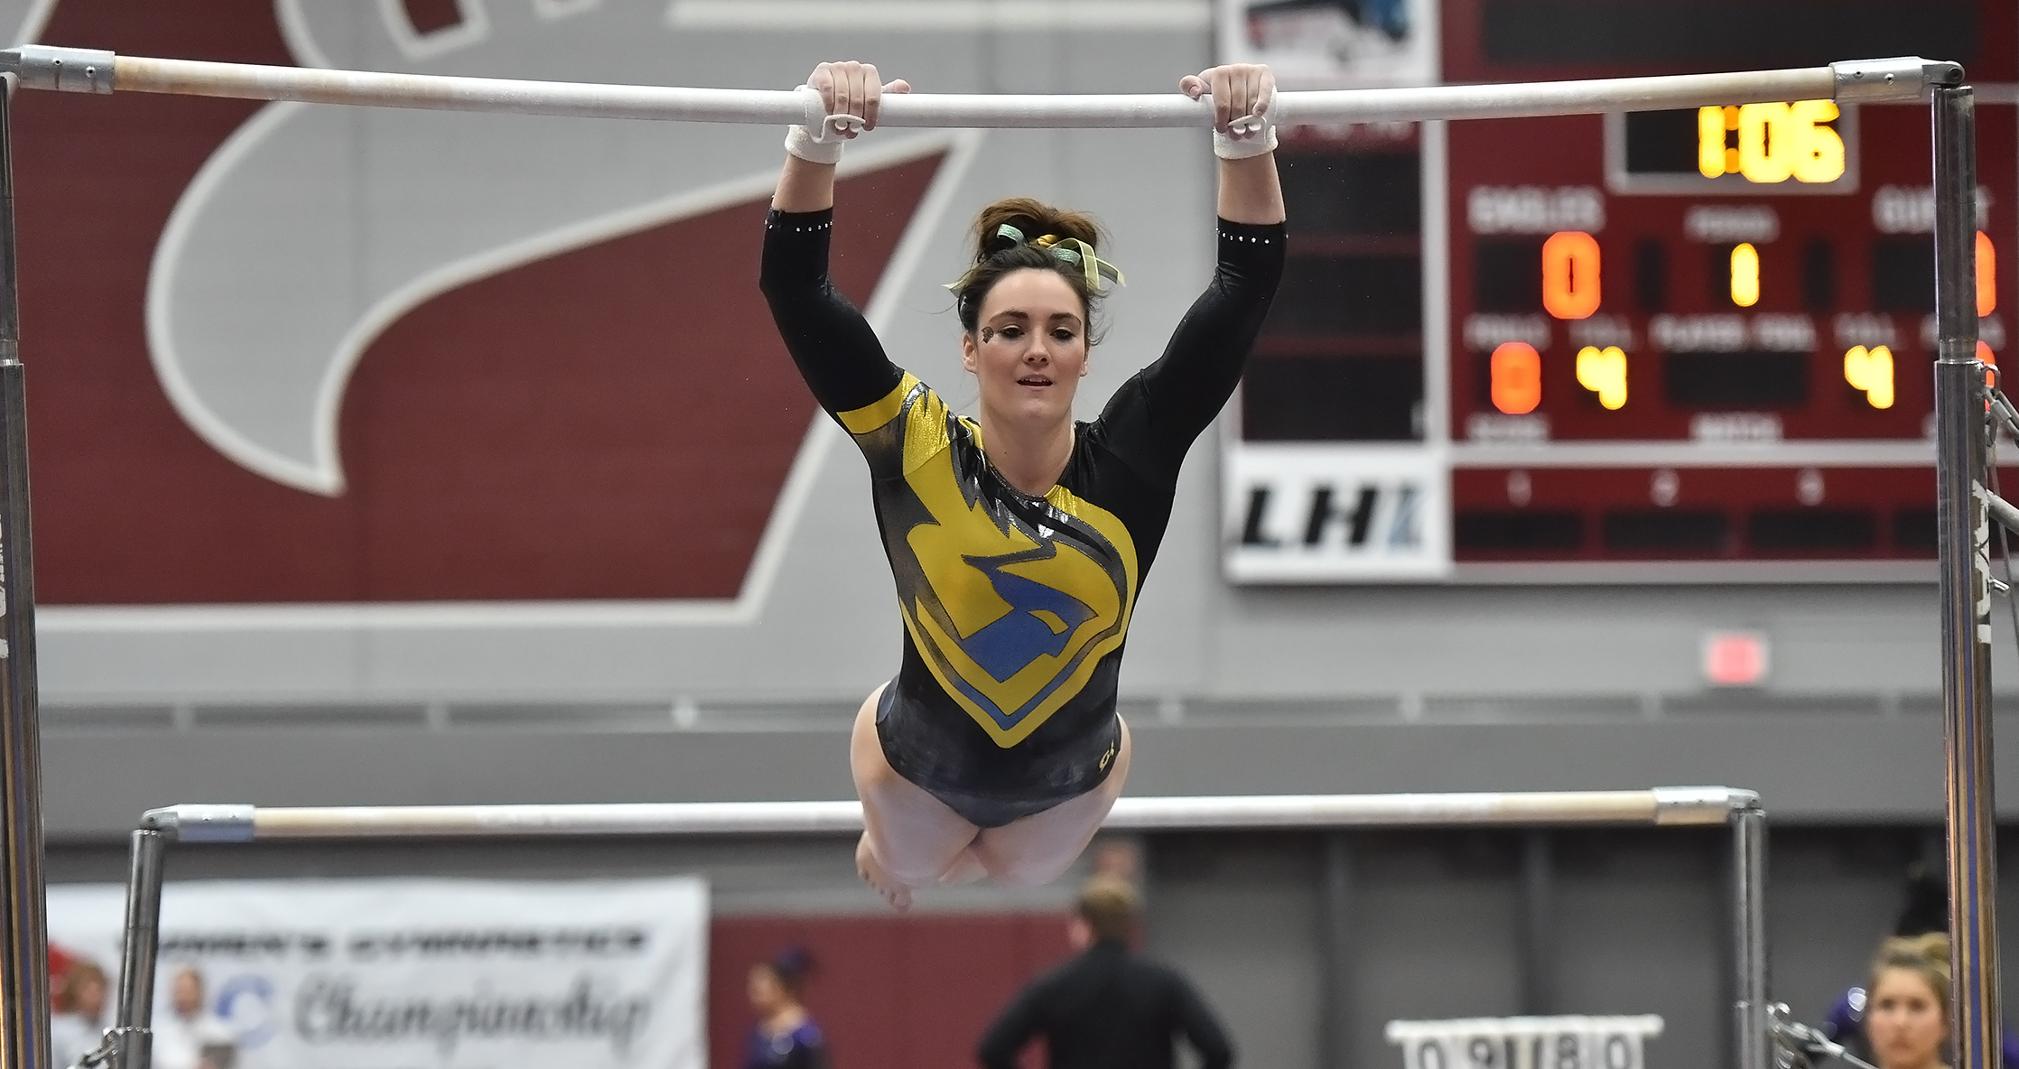 Kylie Fischer placed 18th in the floor exercise and 22nd on the uneven bars at the WIAC Championship/NCGA West Regional.